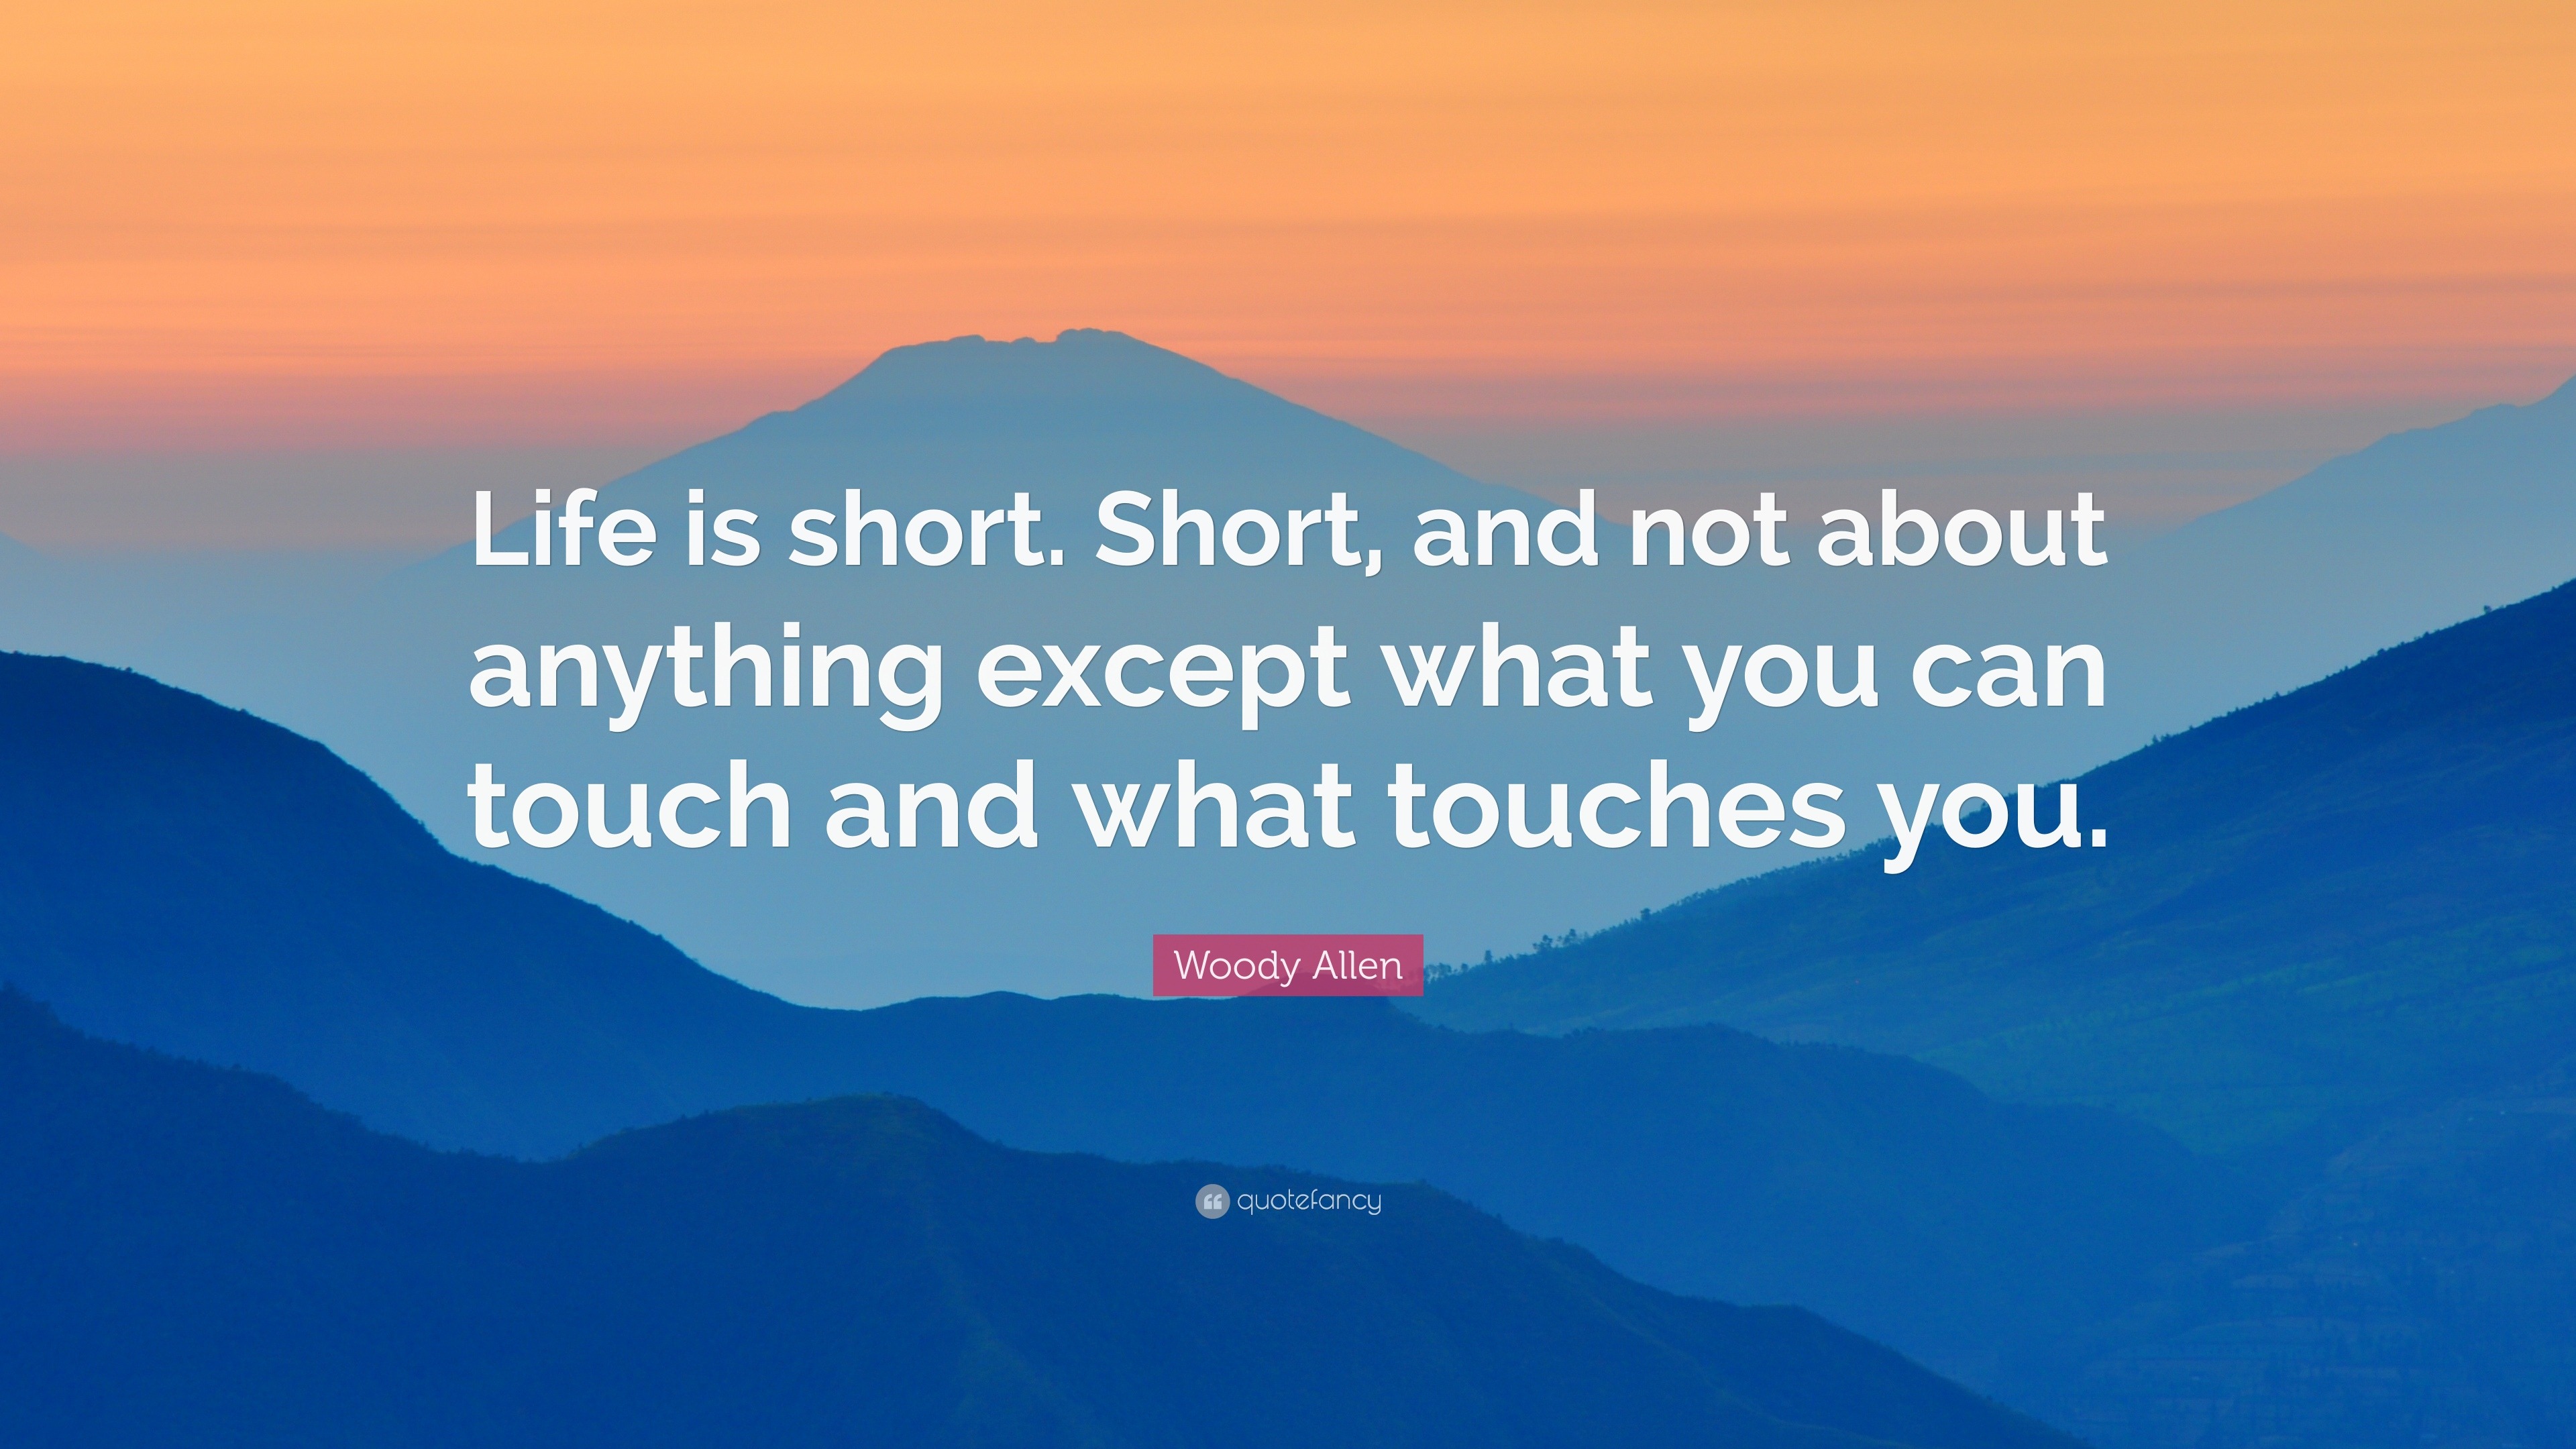 life-is-short-quotes-40-wallpapers-quotefancy